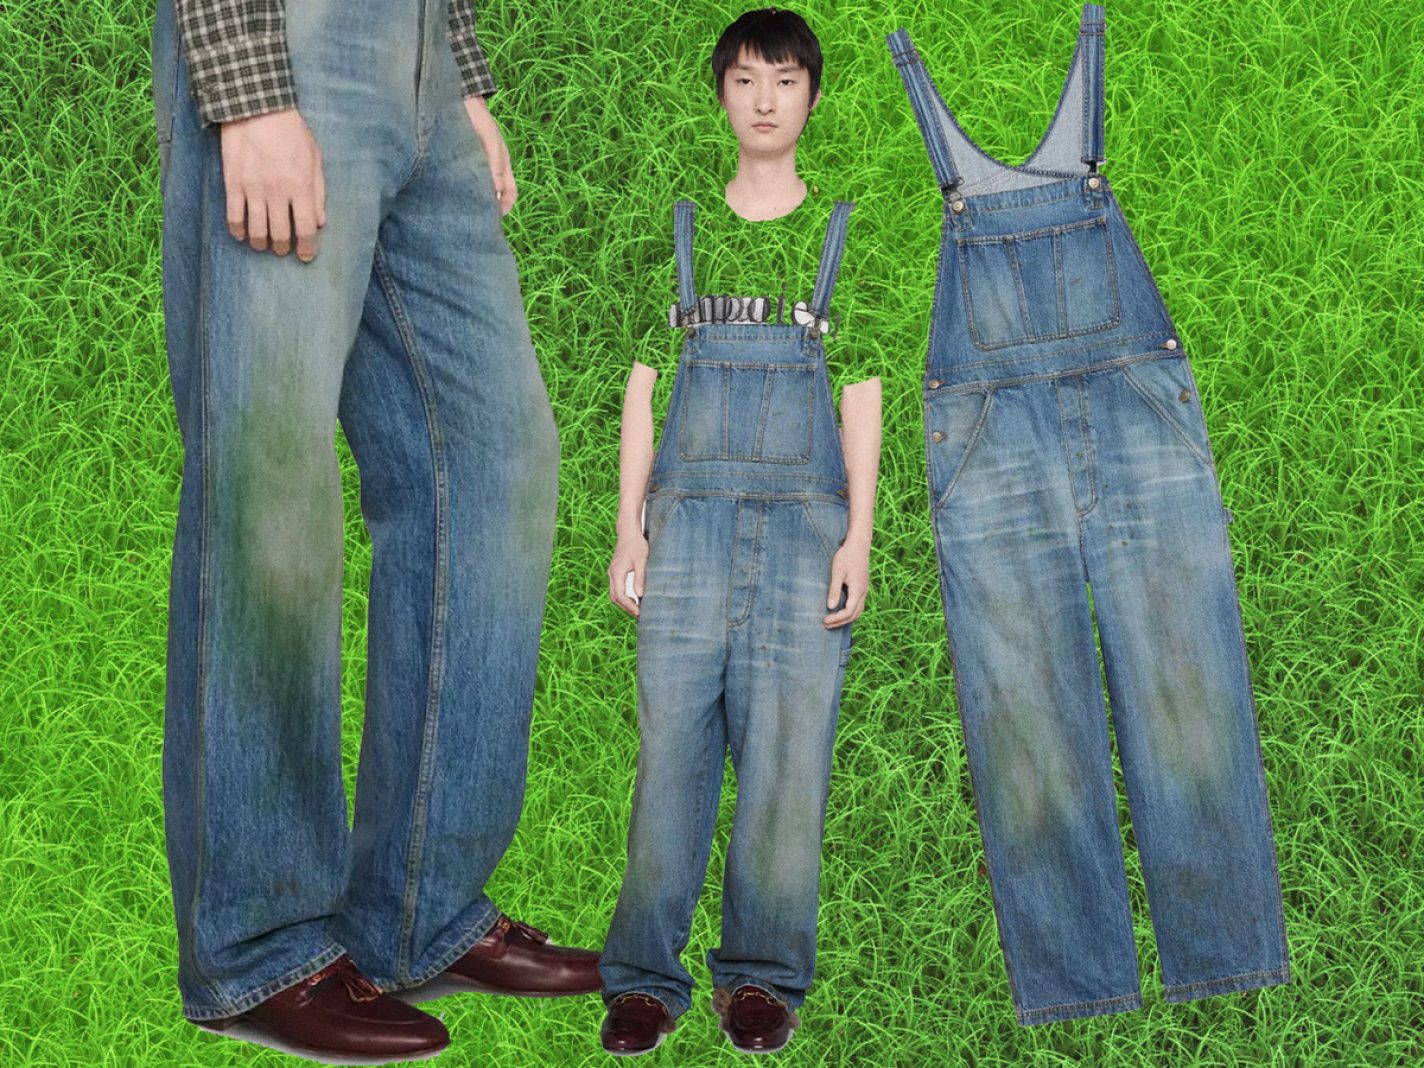 Gucci, We've Been Wearing Grass-Stained Denim Since We Were Kids